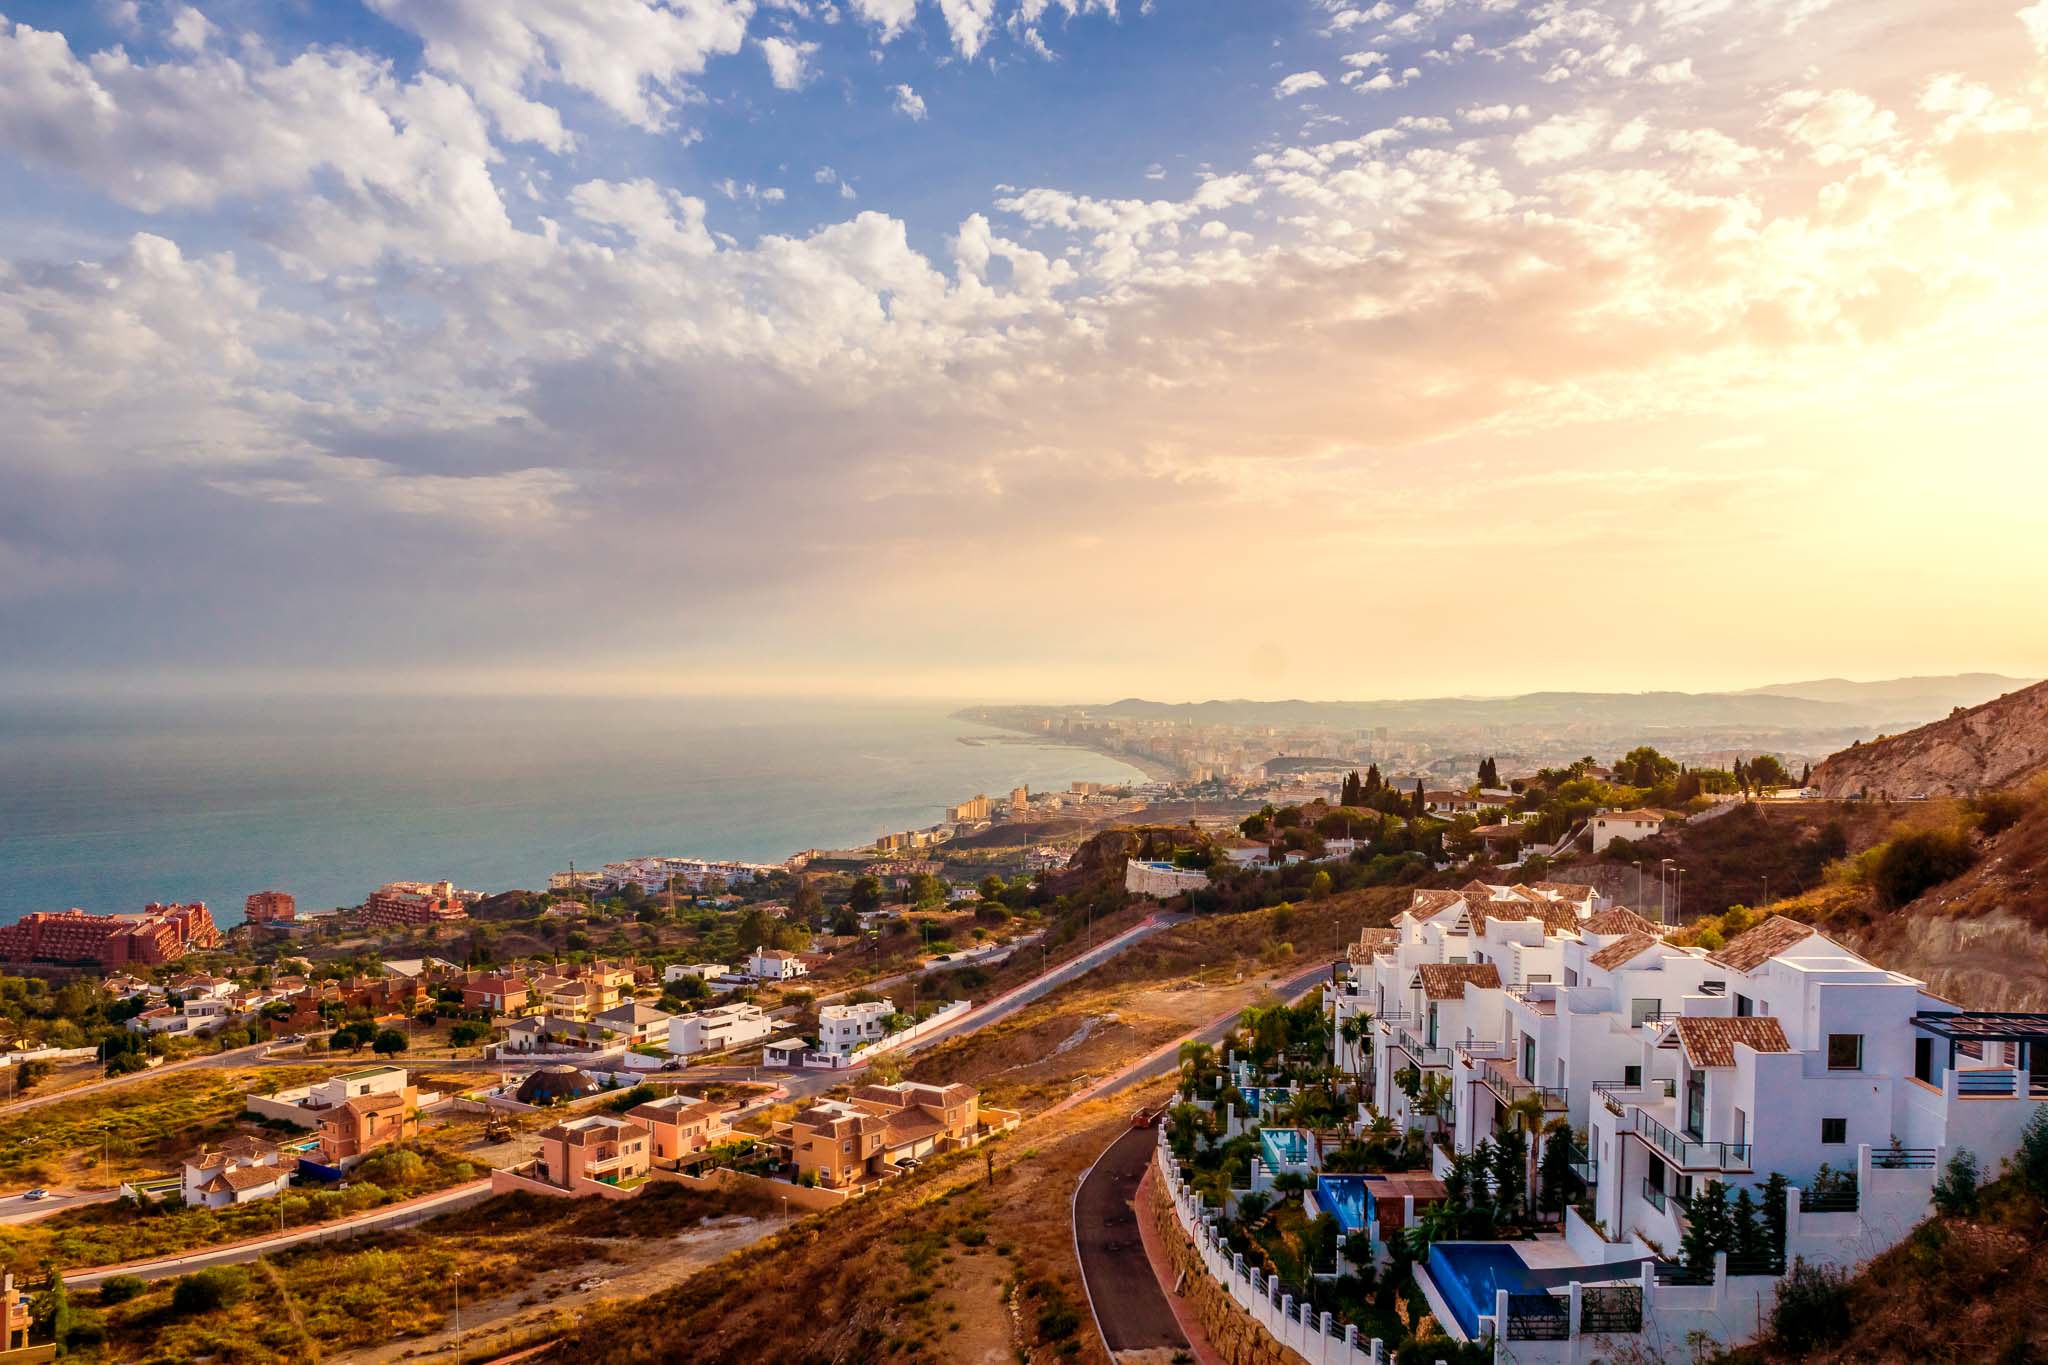 13 Top-Rated Attractions & Things to Do in Marbella